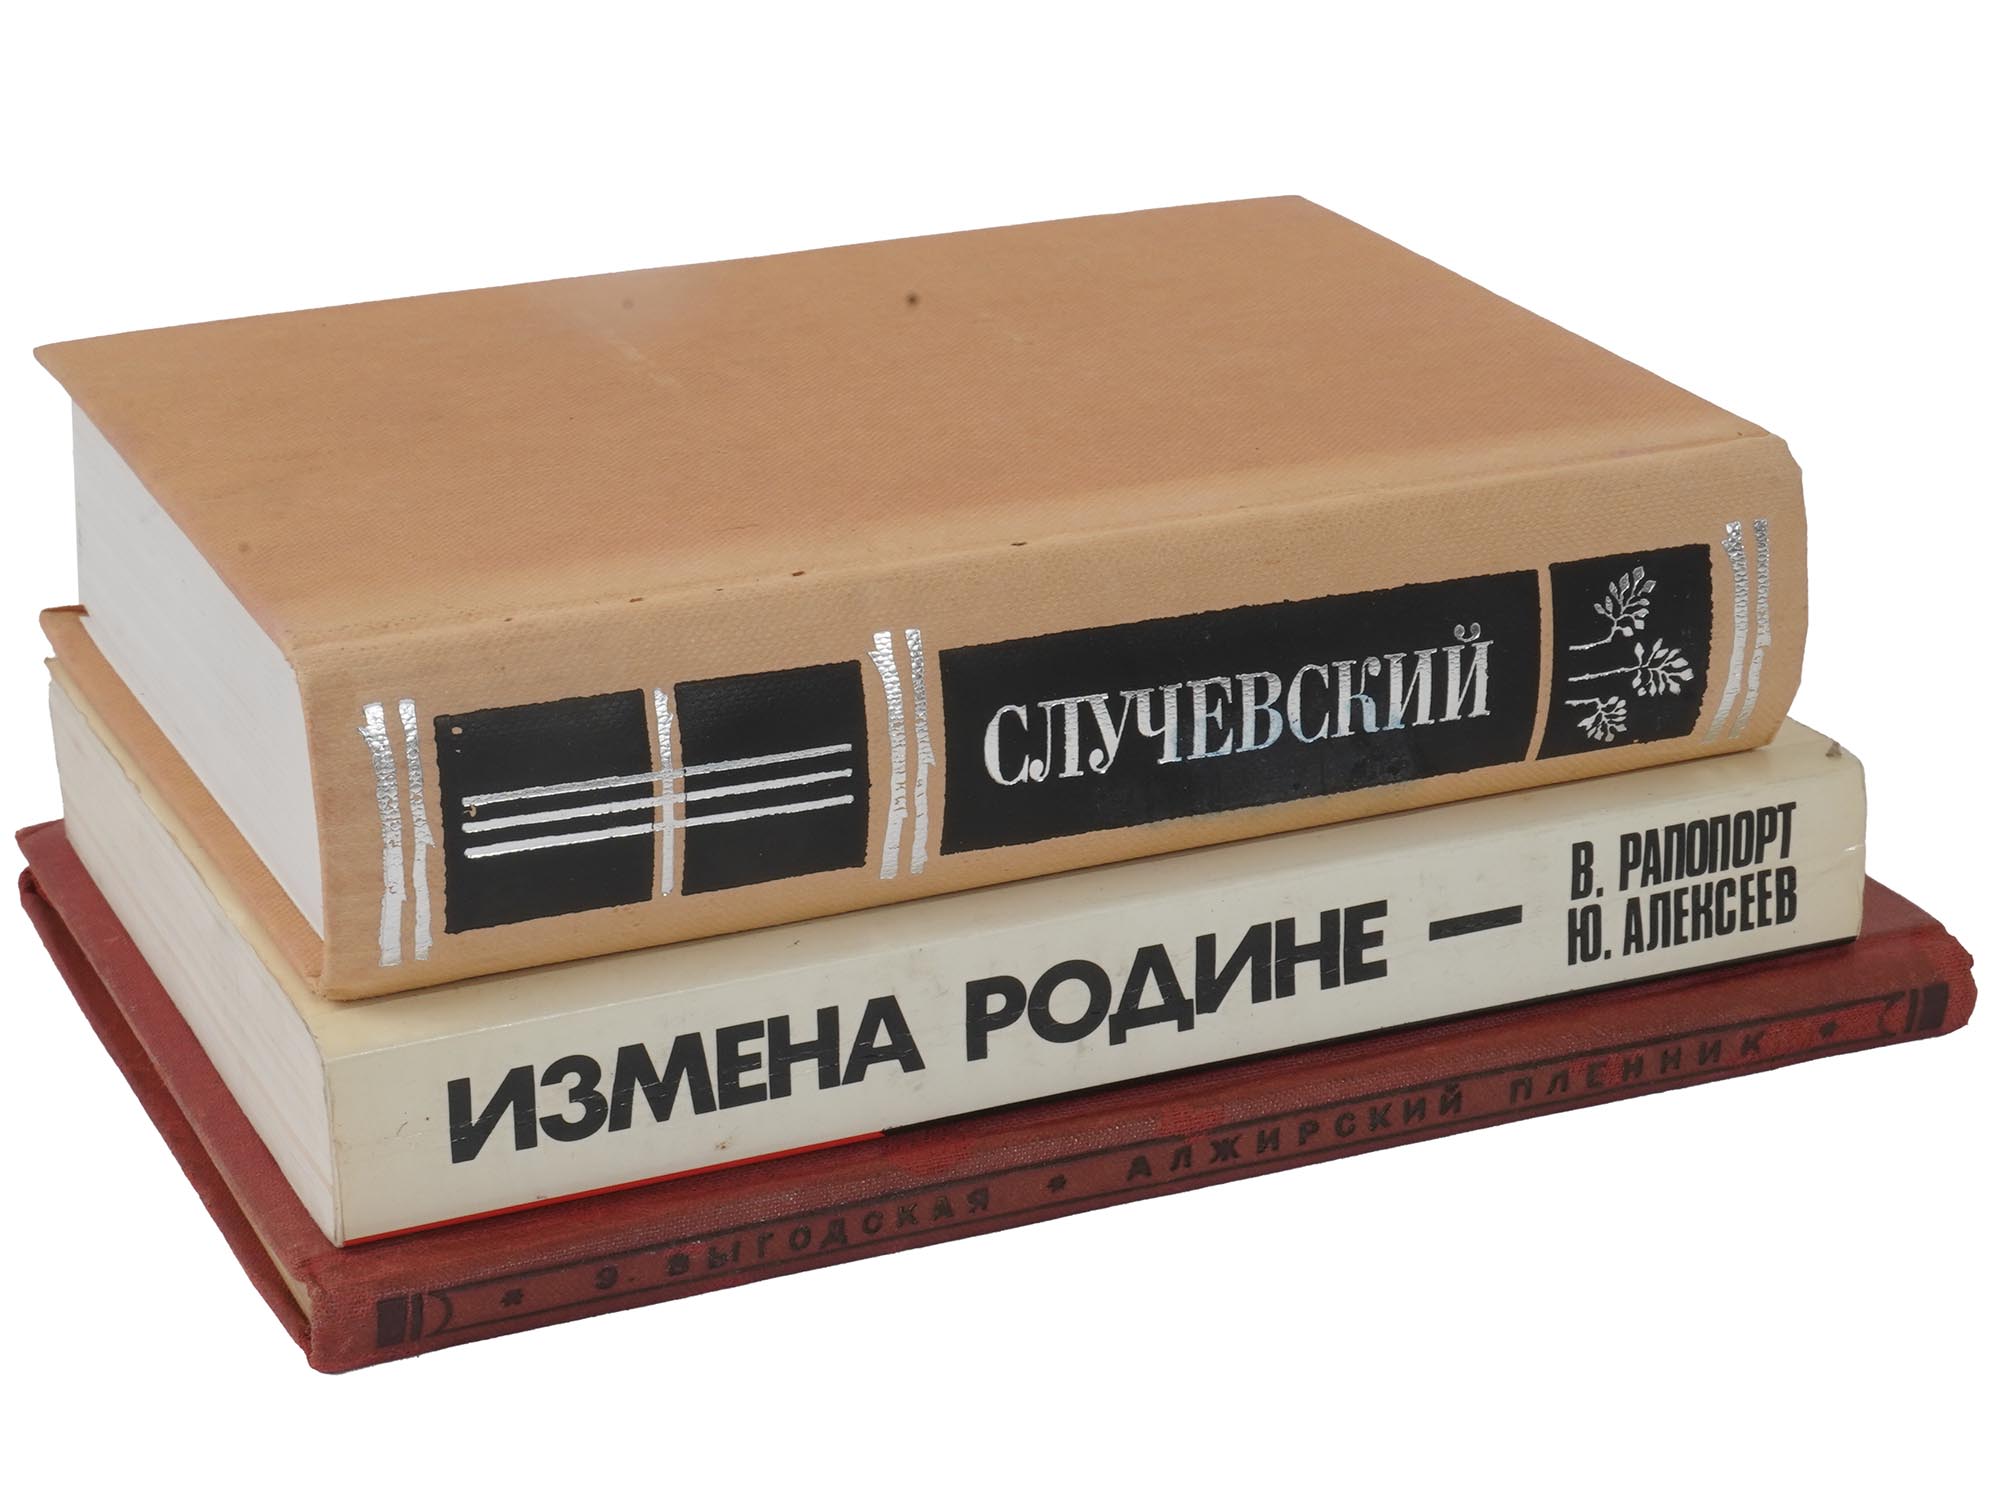 COLLECTION OF RUSSIAN BOOKS AND VINYL RECORDS PIC-2